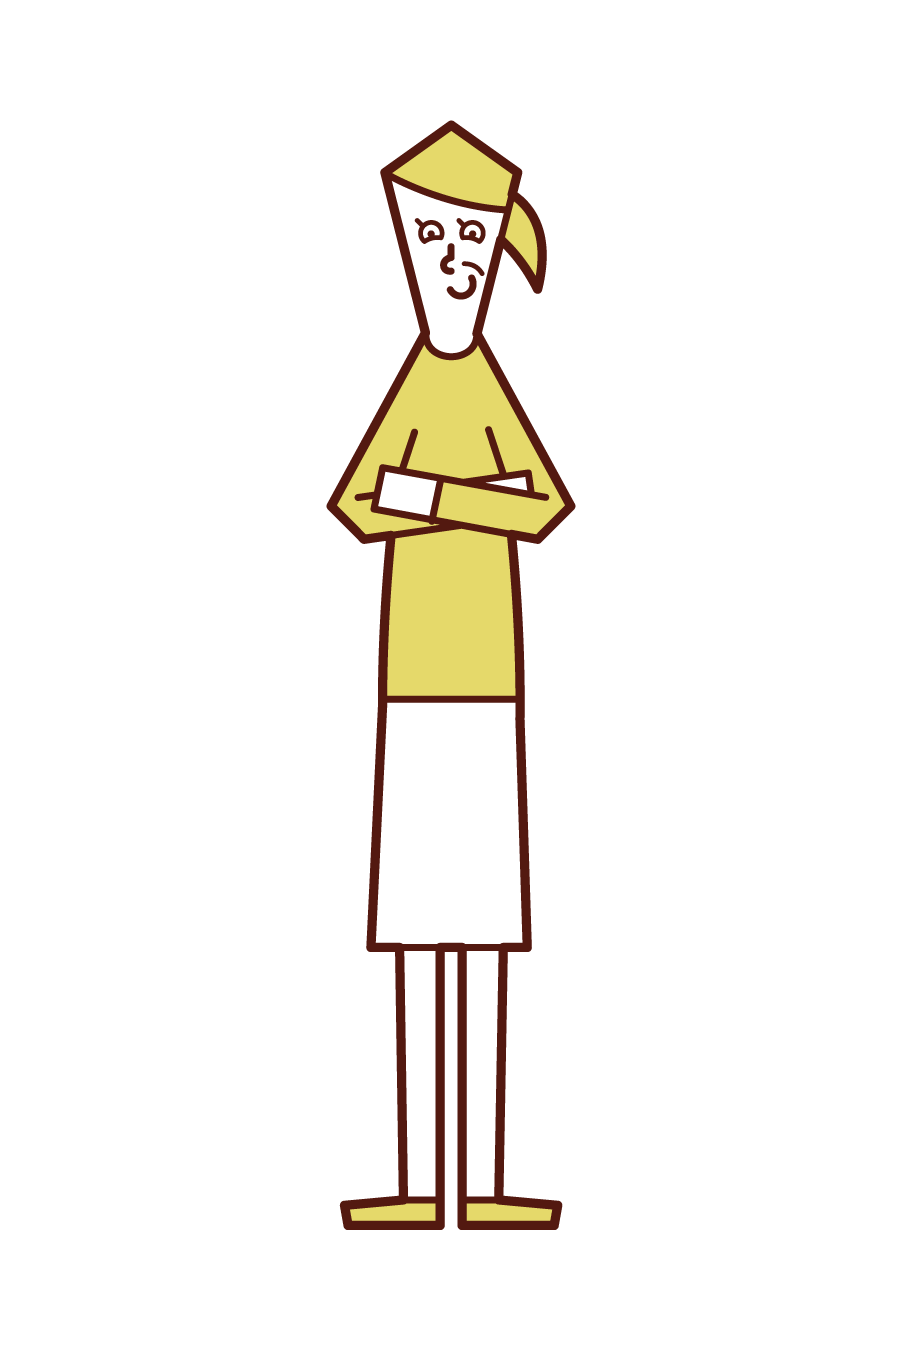 Illustration of a condescending person (woman)